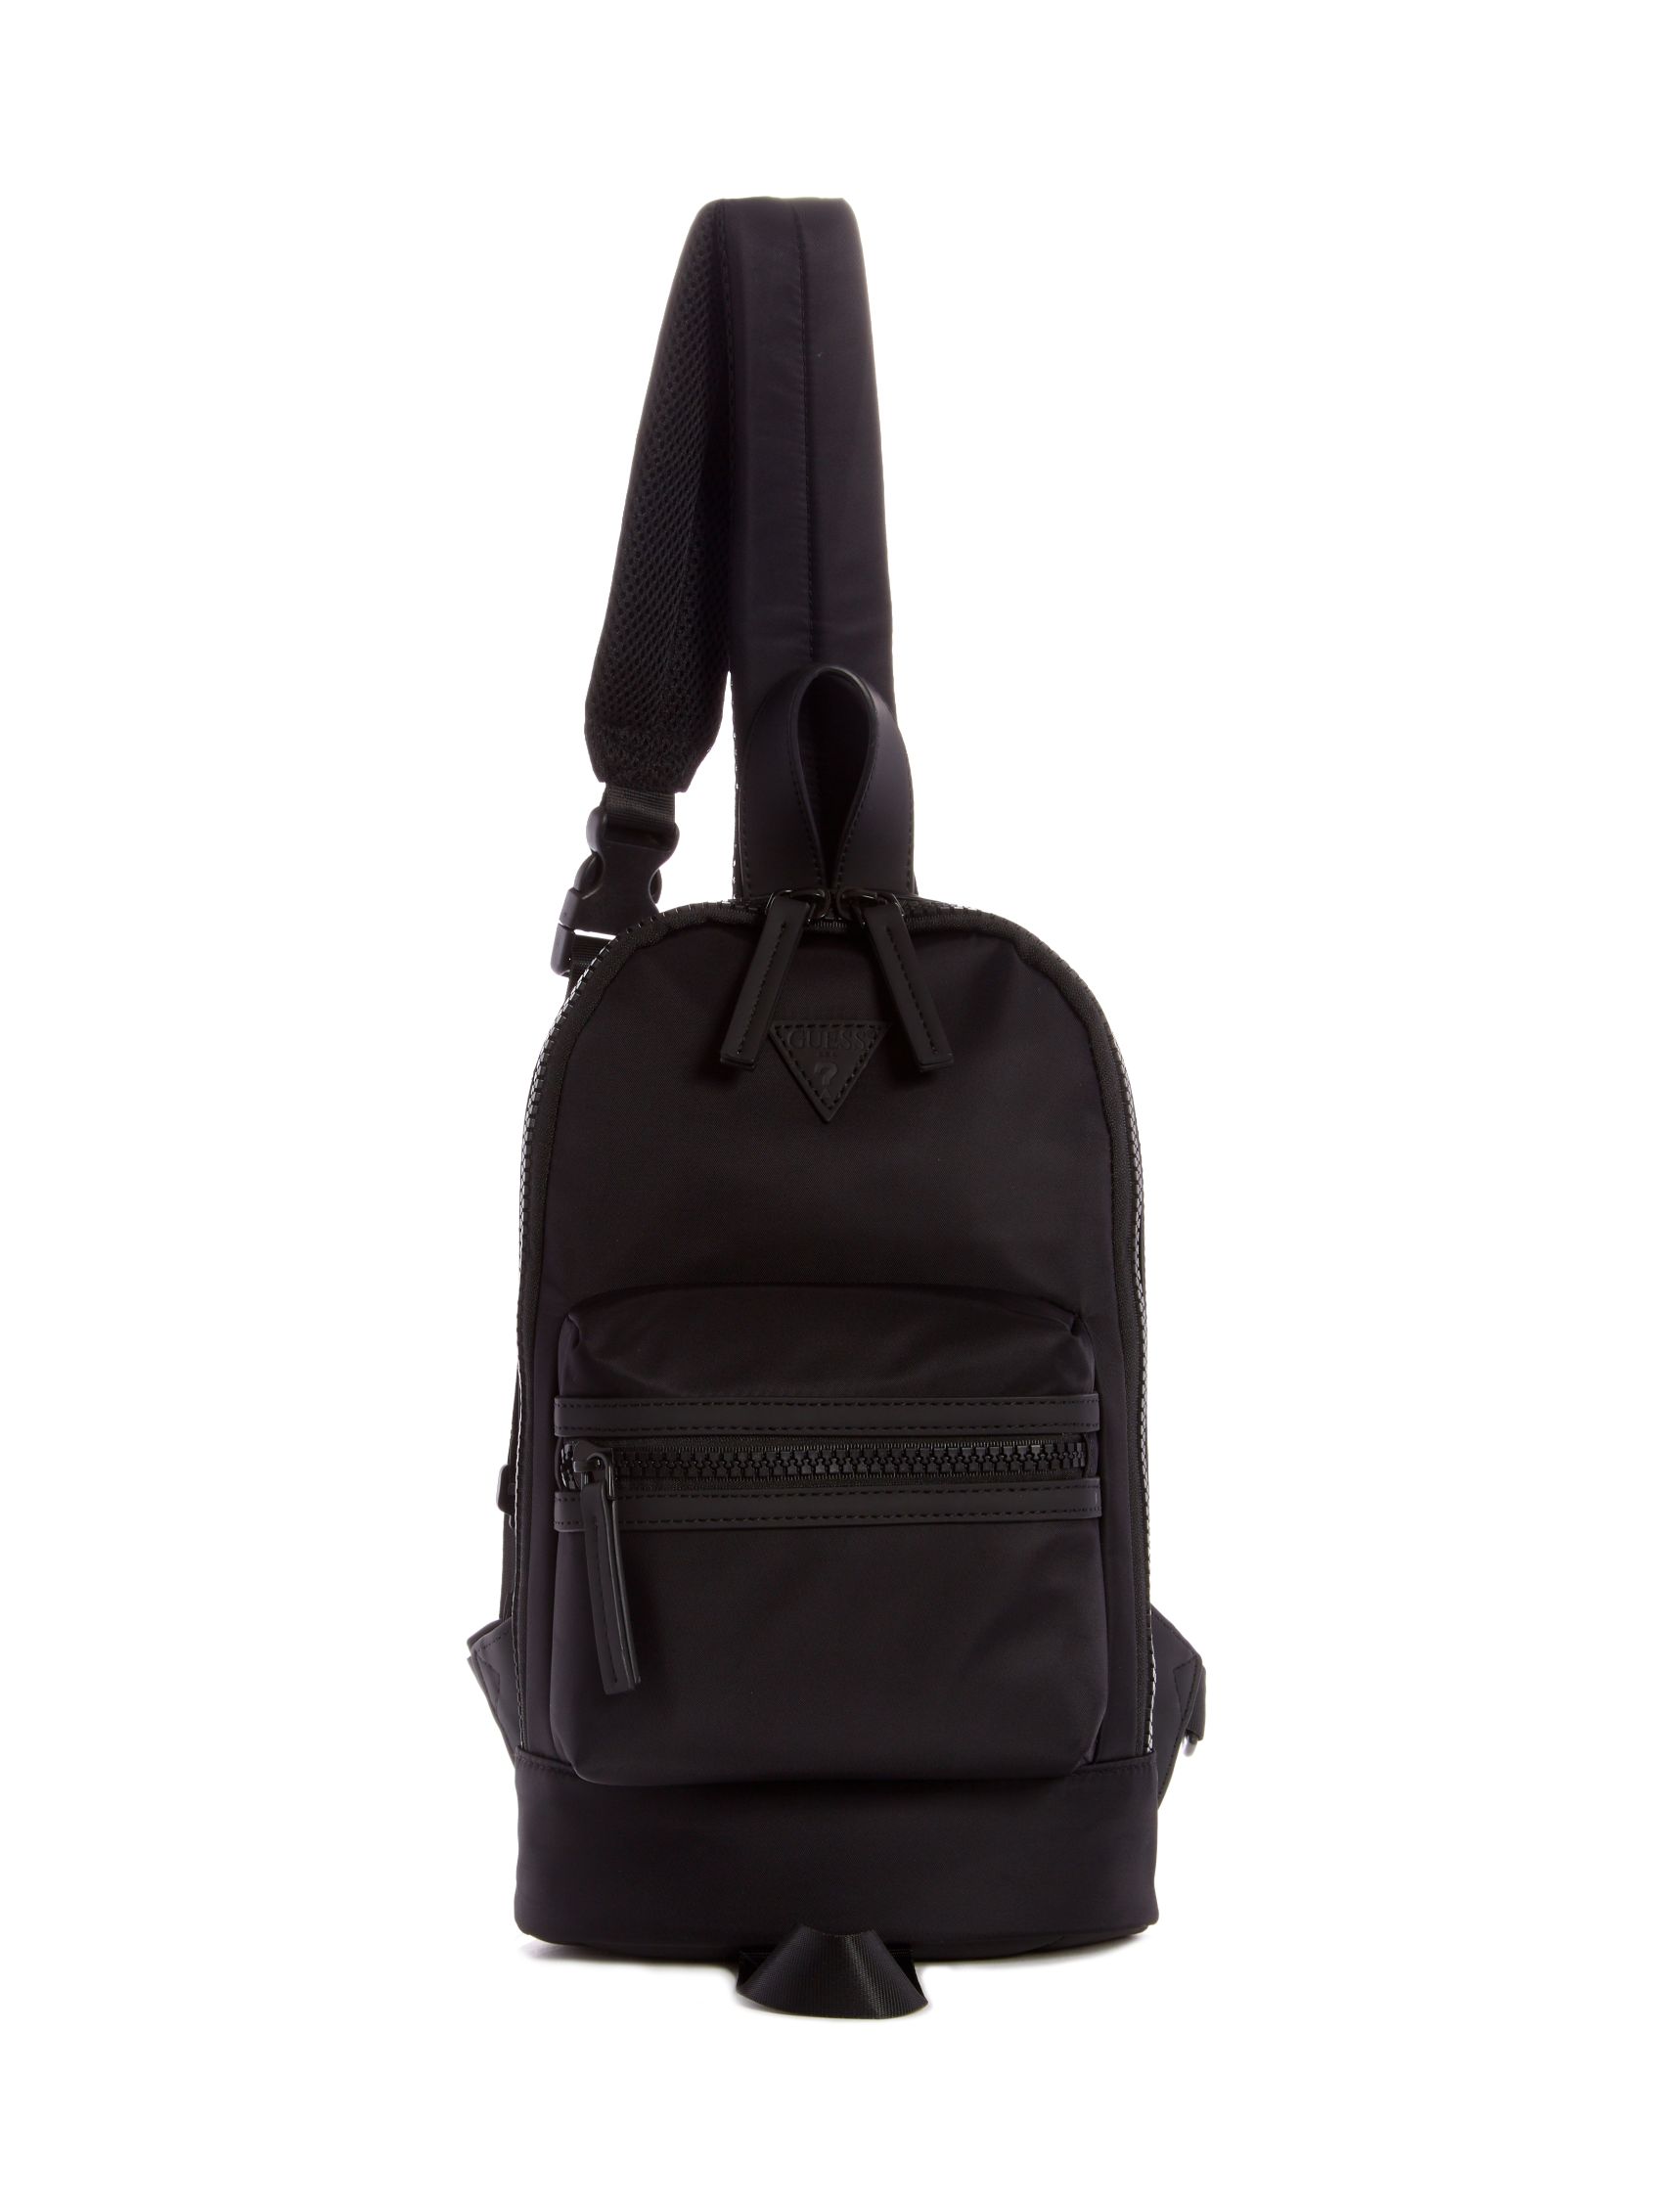 ORIGINAL SLING BACKPACK | Guess Philippines